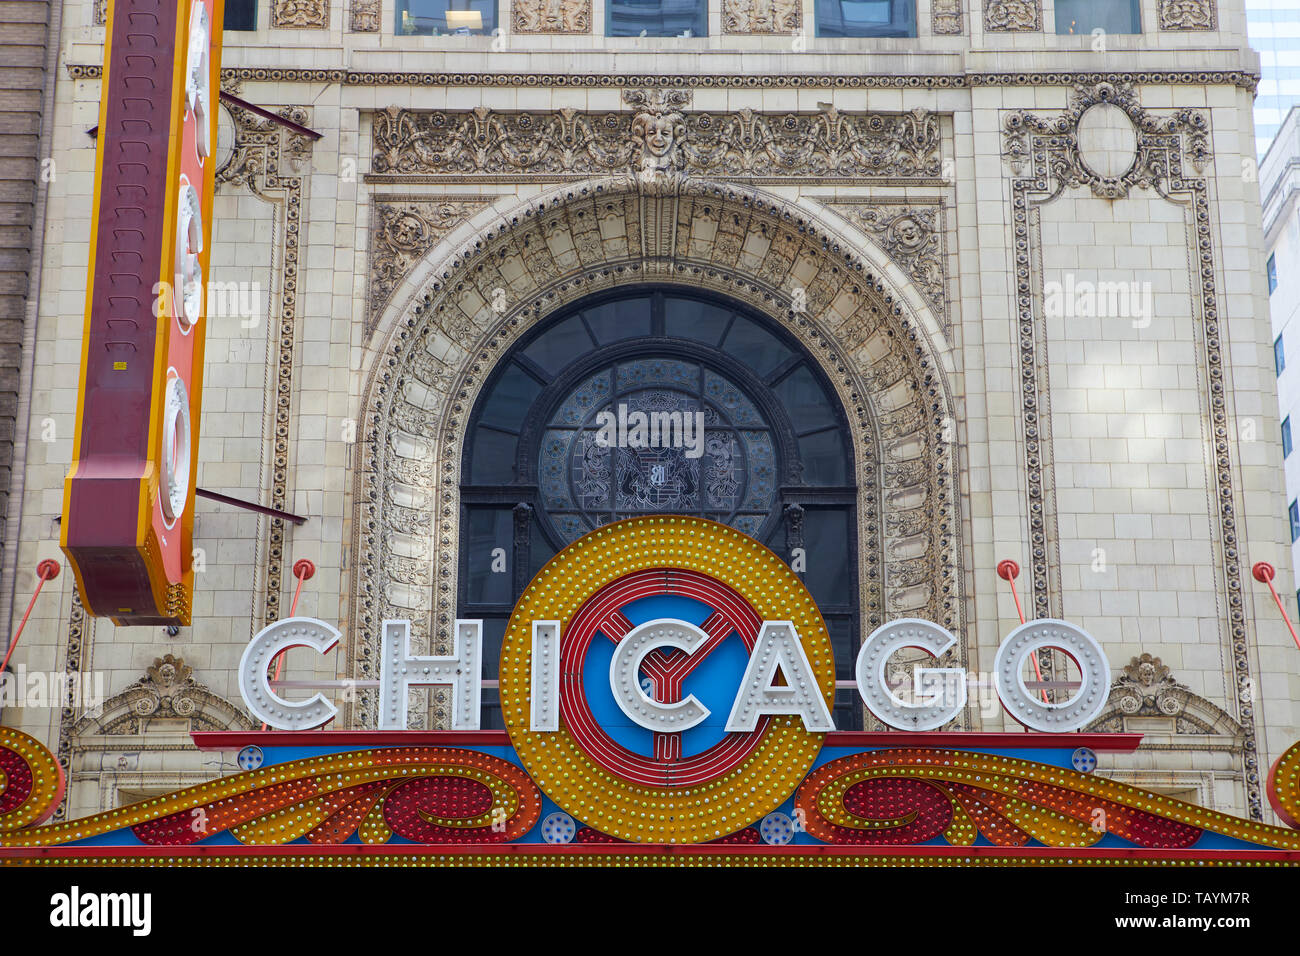 The iconic Chicago theater sign, Chicago, Illinois, United States Stock Photo